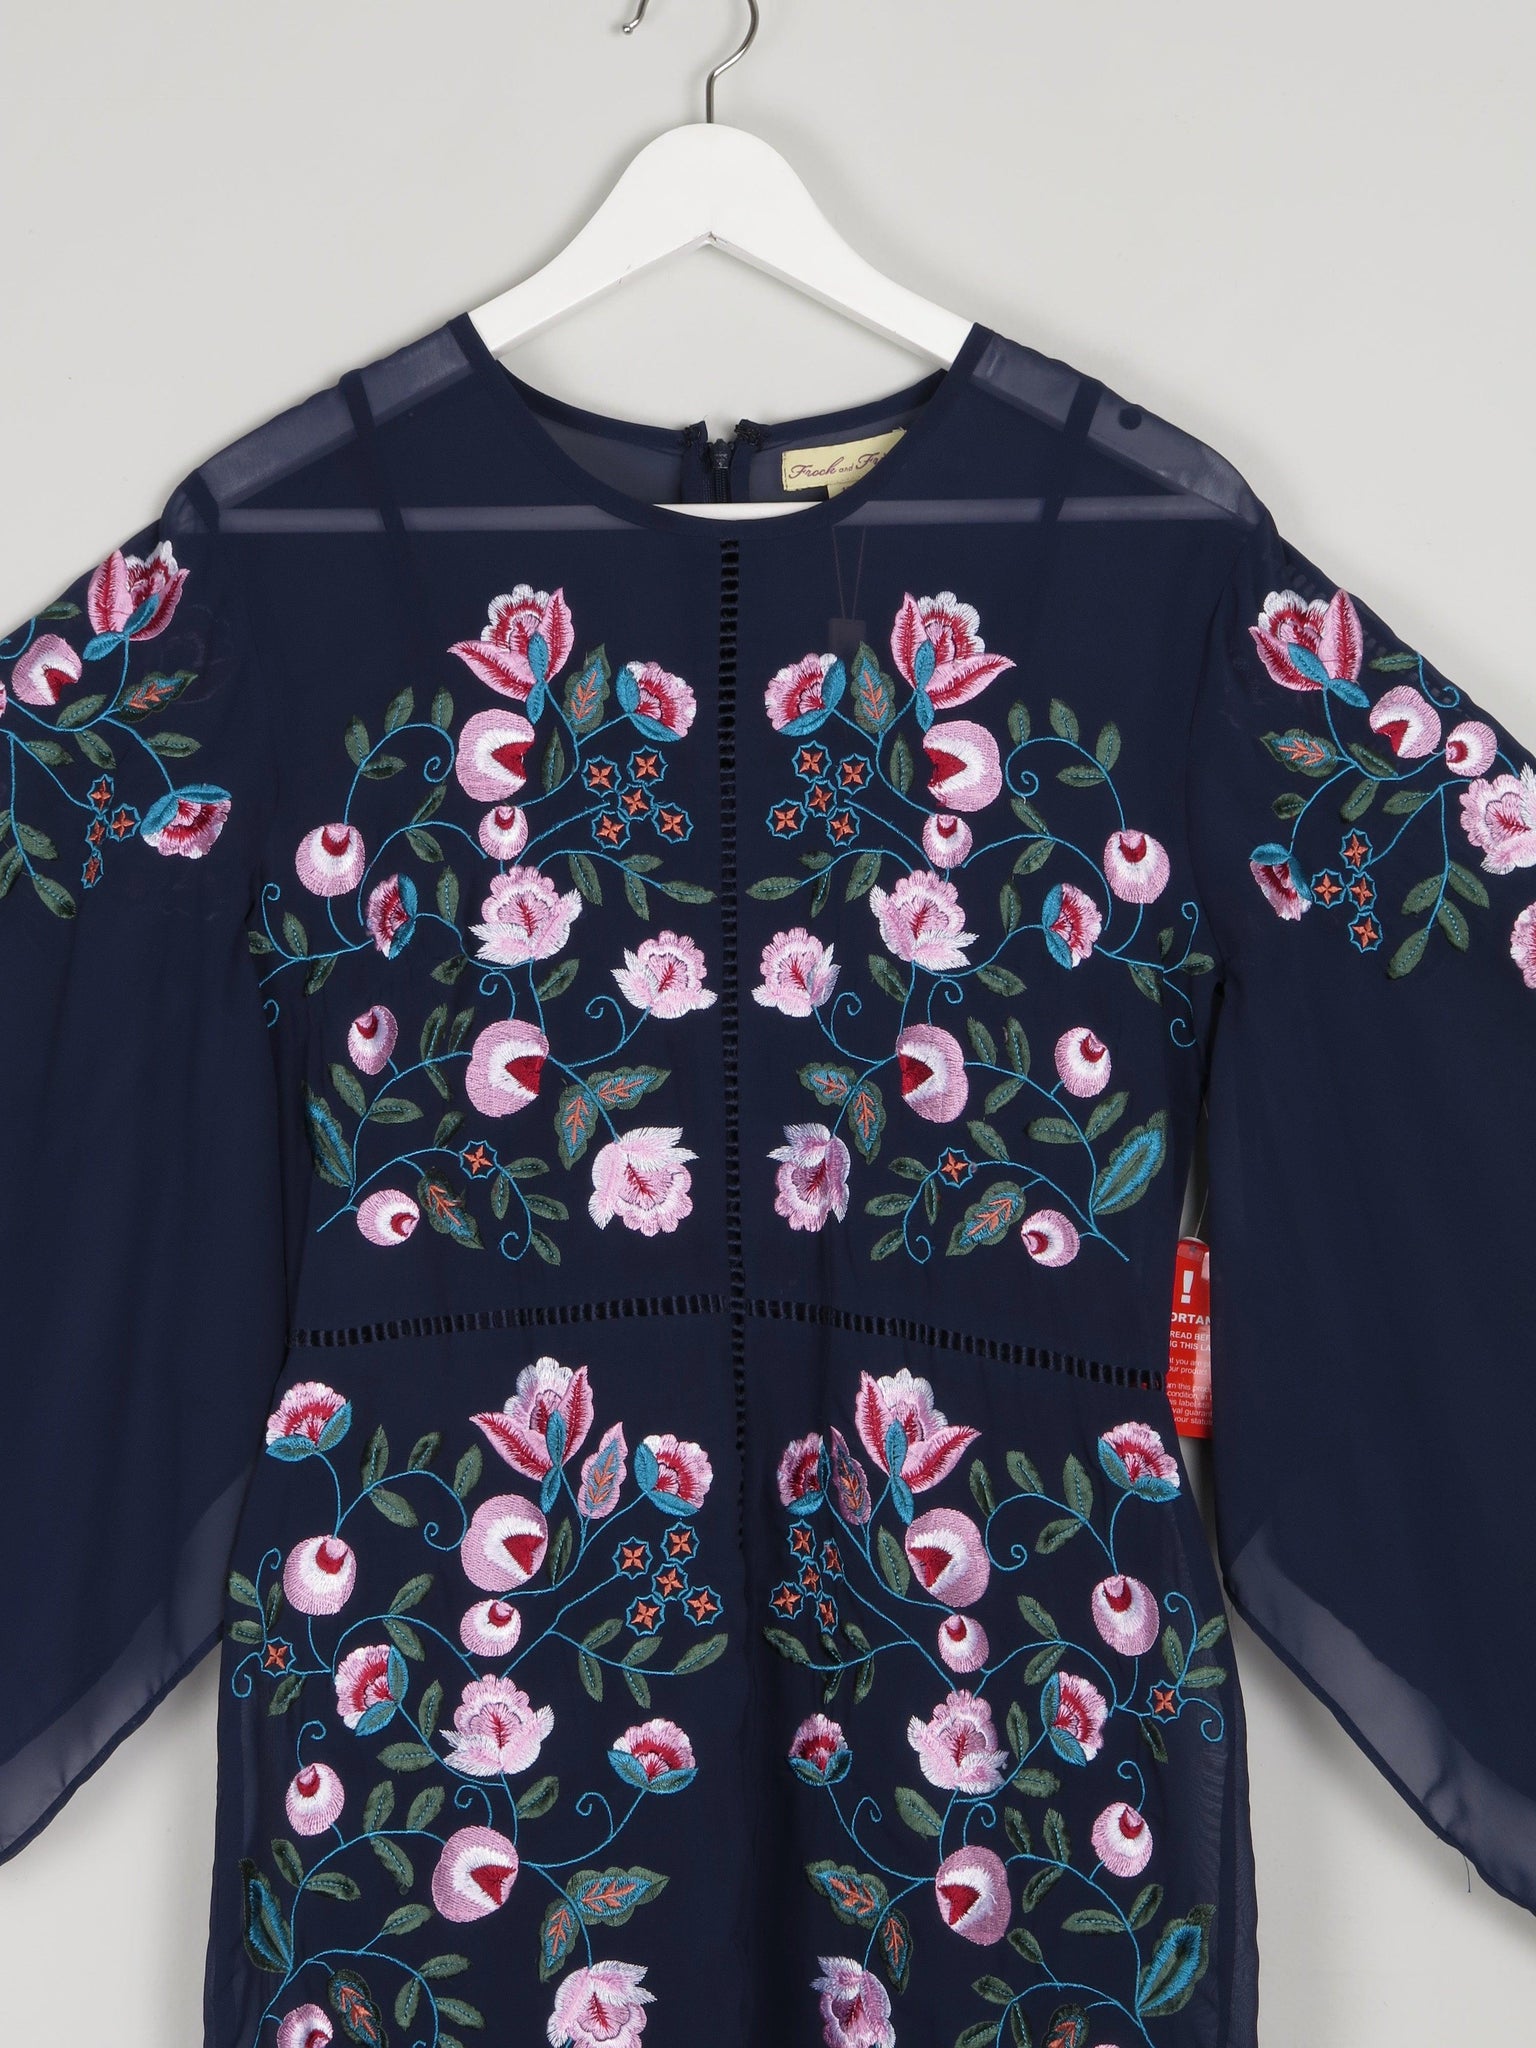 Frock & Frill Navy Embroidered Dress 10 - The Harlequin